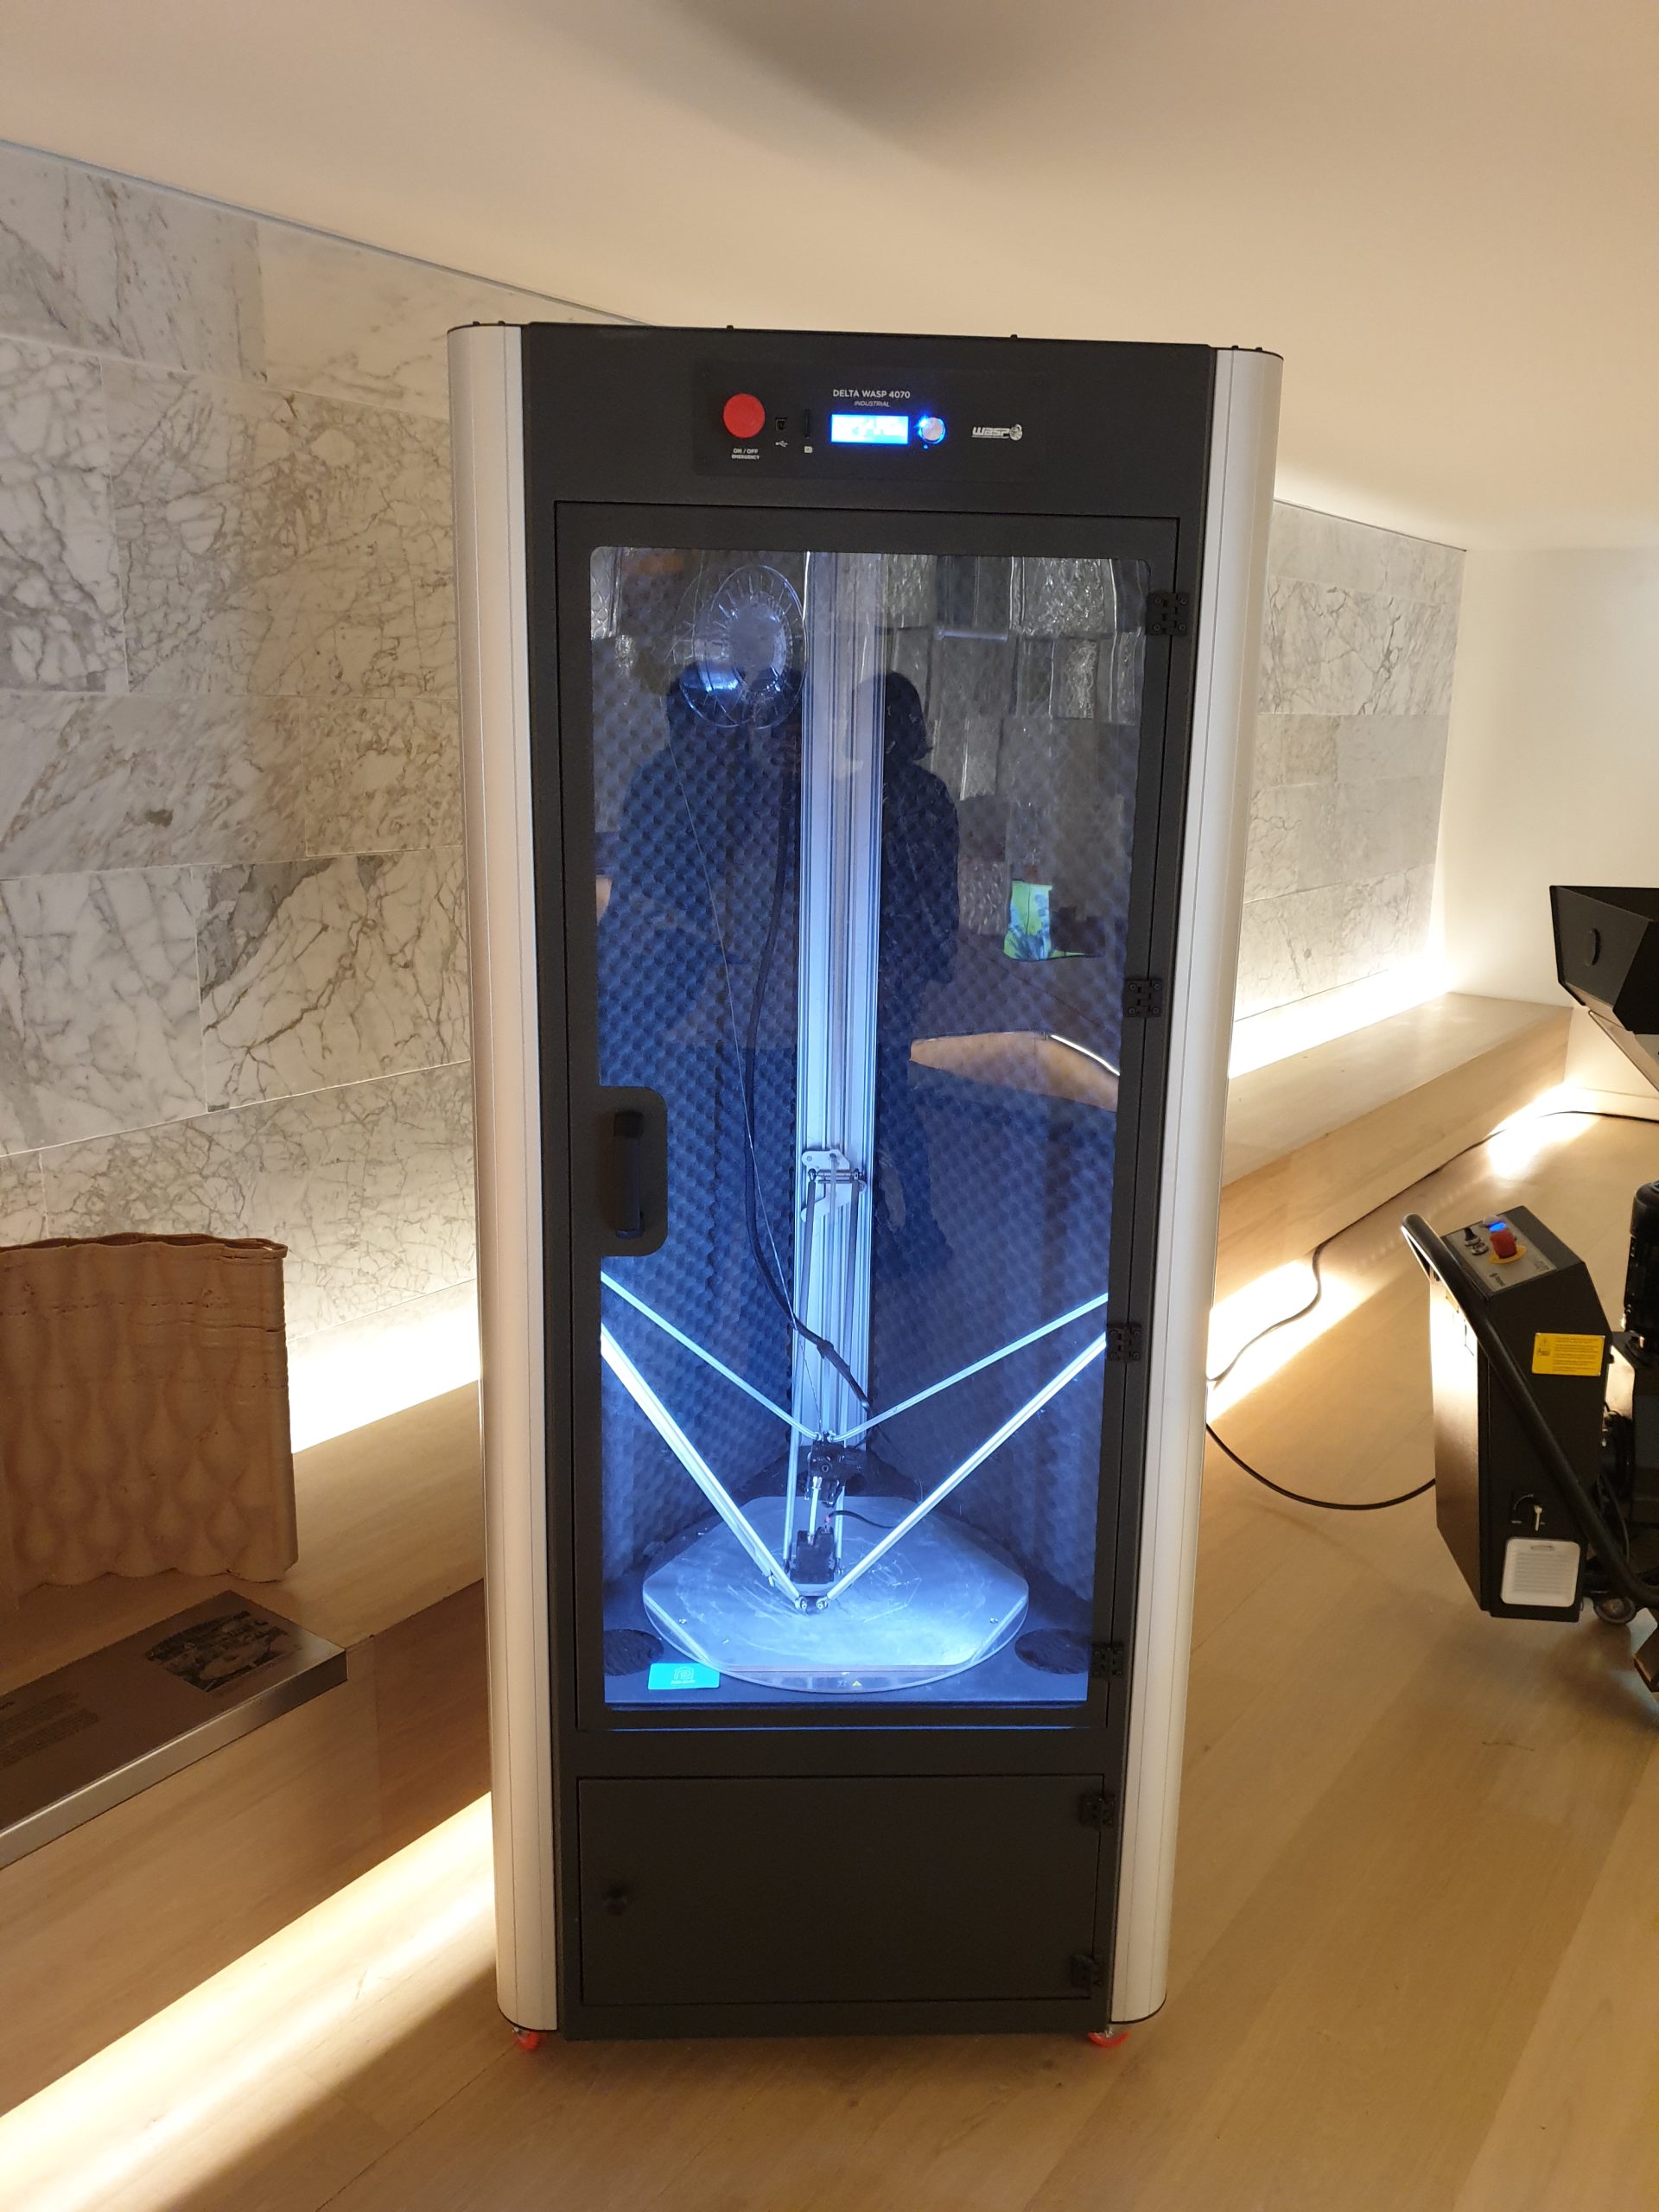 The Delta WASP 3D printer used to produce the modules is also on display as part of the exhibit. Photo via Hayley Everett.